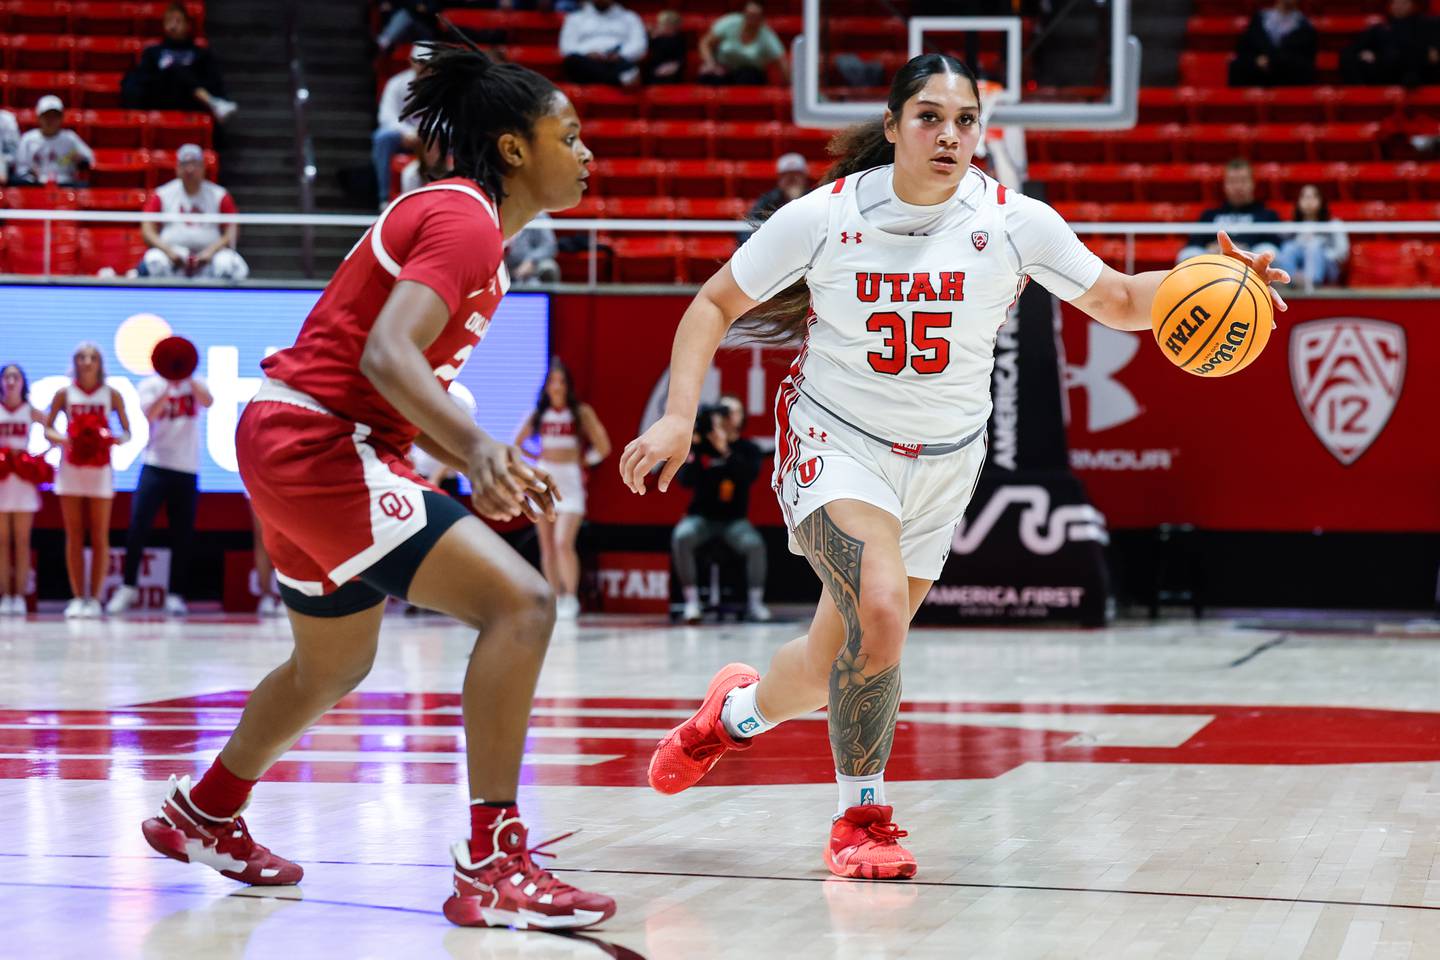 Utah's Alissa Pili of Anchorage dribbles in a game against the University of Oklahoma